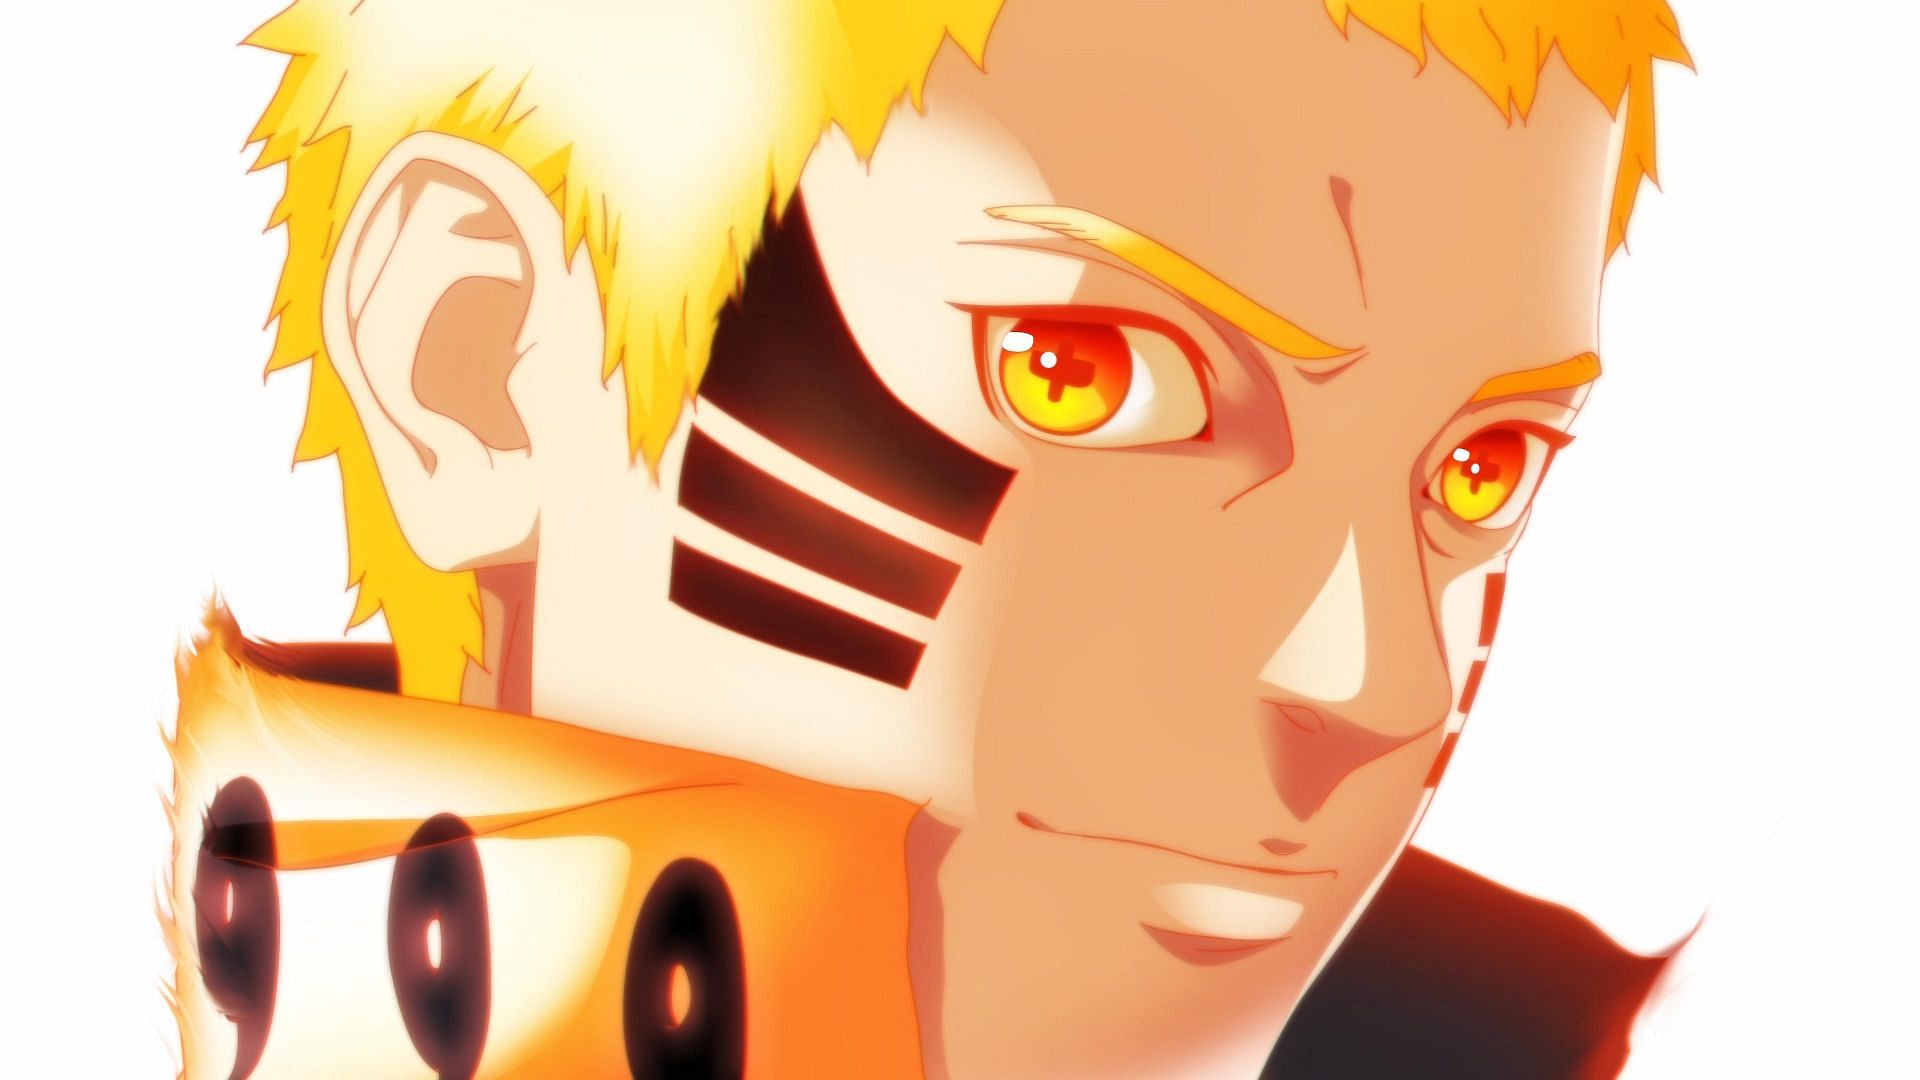 WHAT IF HOKAGE NARUTO WENT BACK IN TIME TO FIX HIS MISTAKES (PART-1)